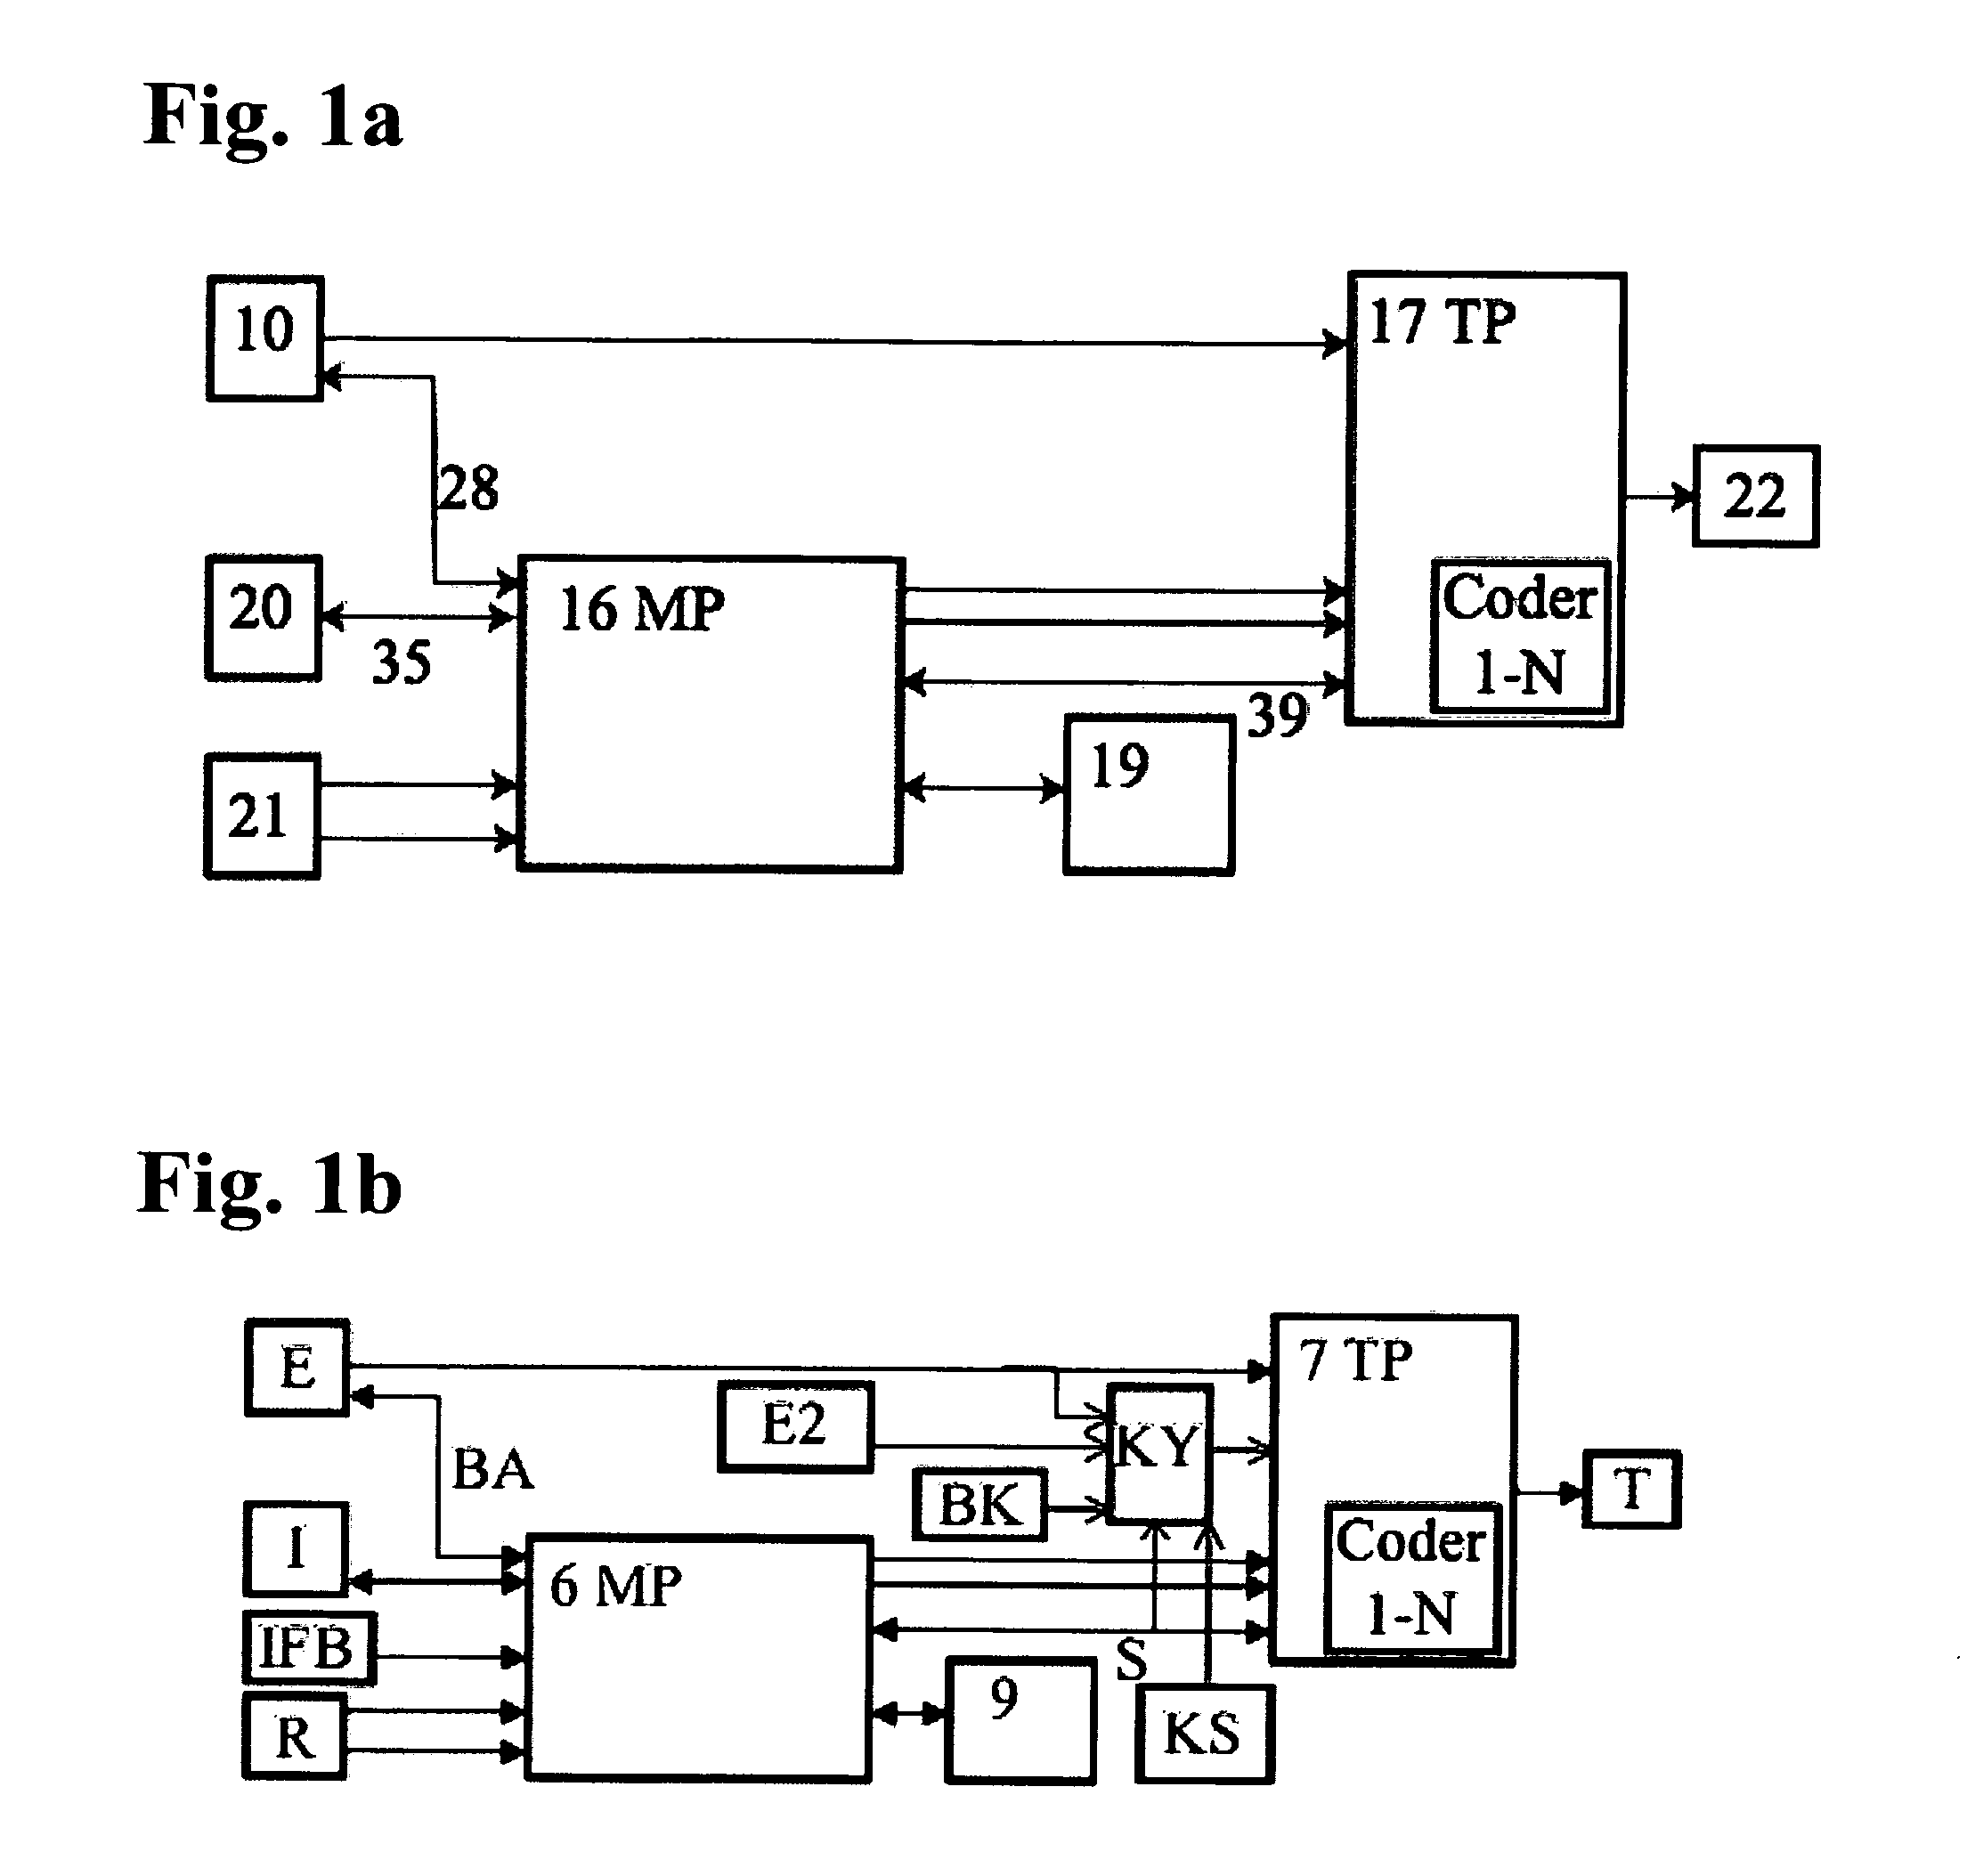 System for transmitting emergency broadcast messages with selectivity to radio, television, computers and smart phones